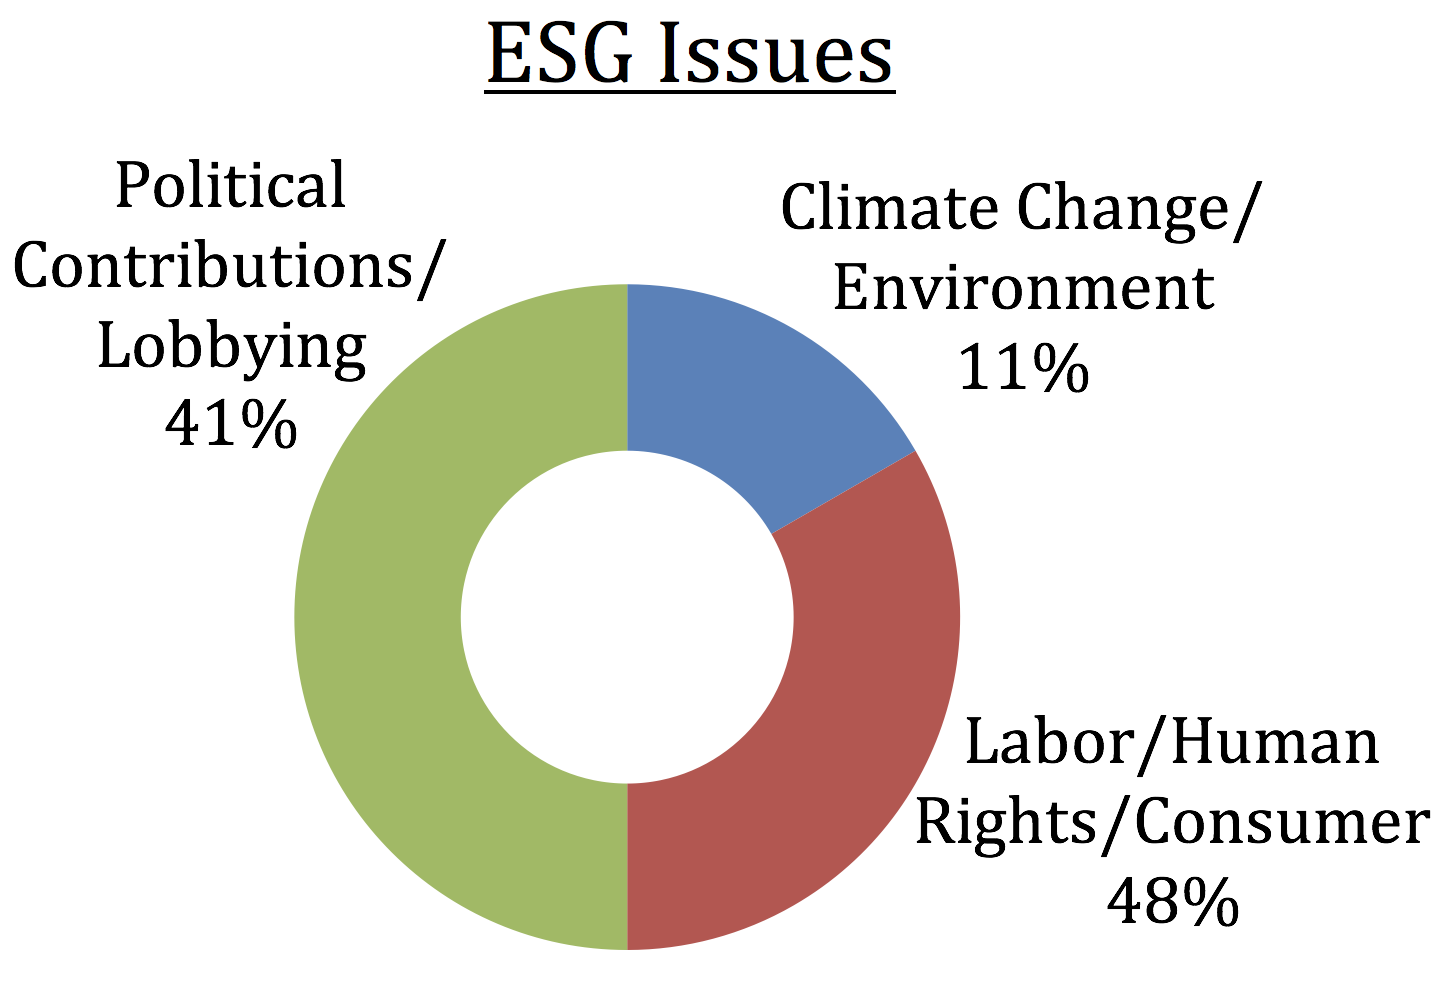 Pie chart of ESG Issues, with full text in caption below image.